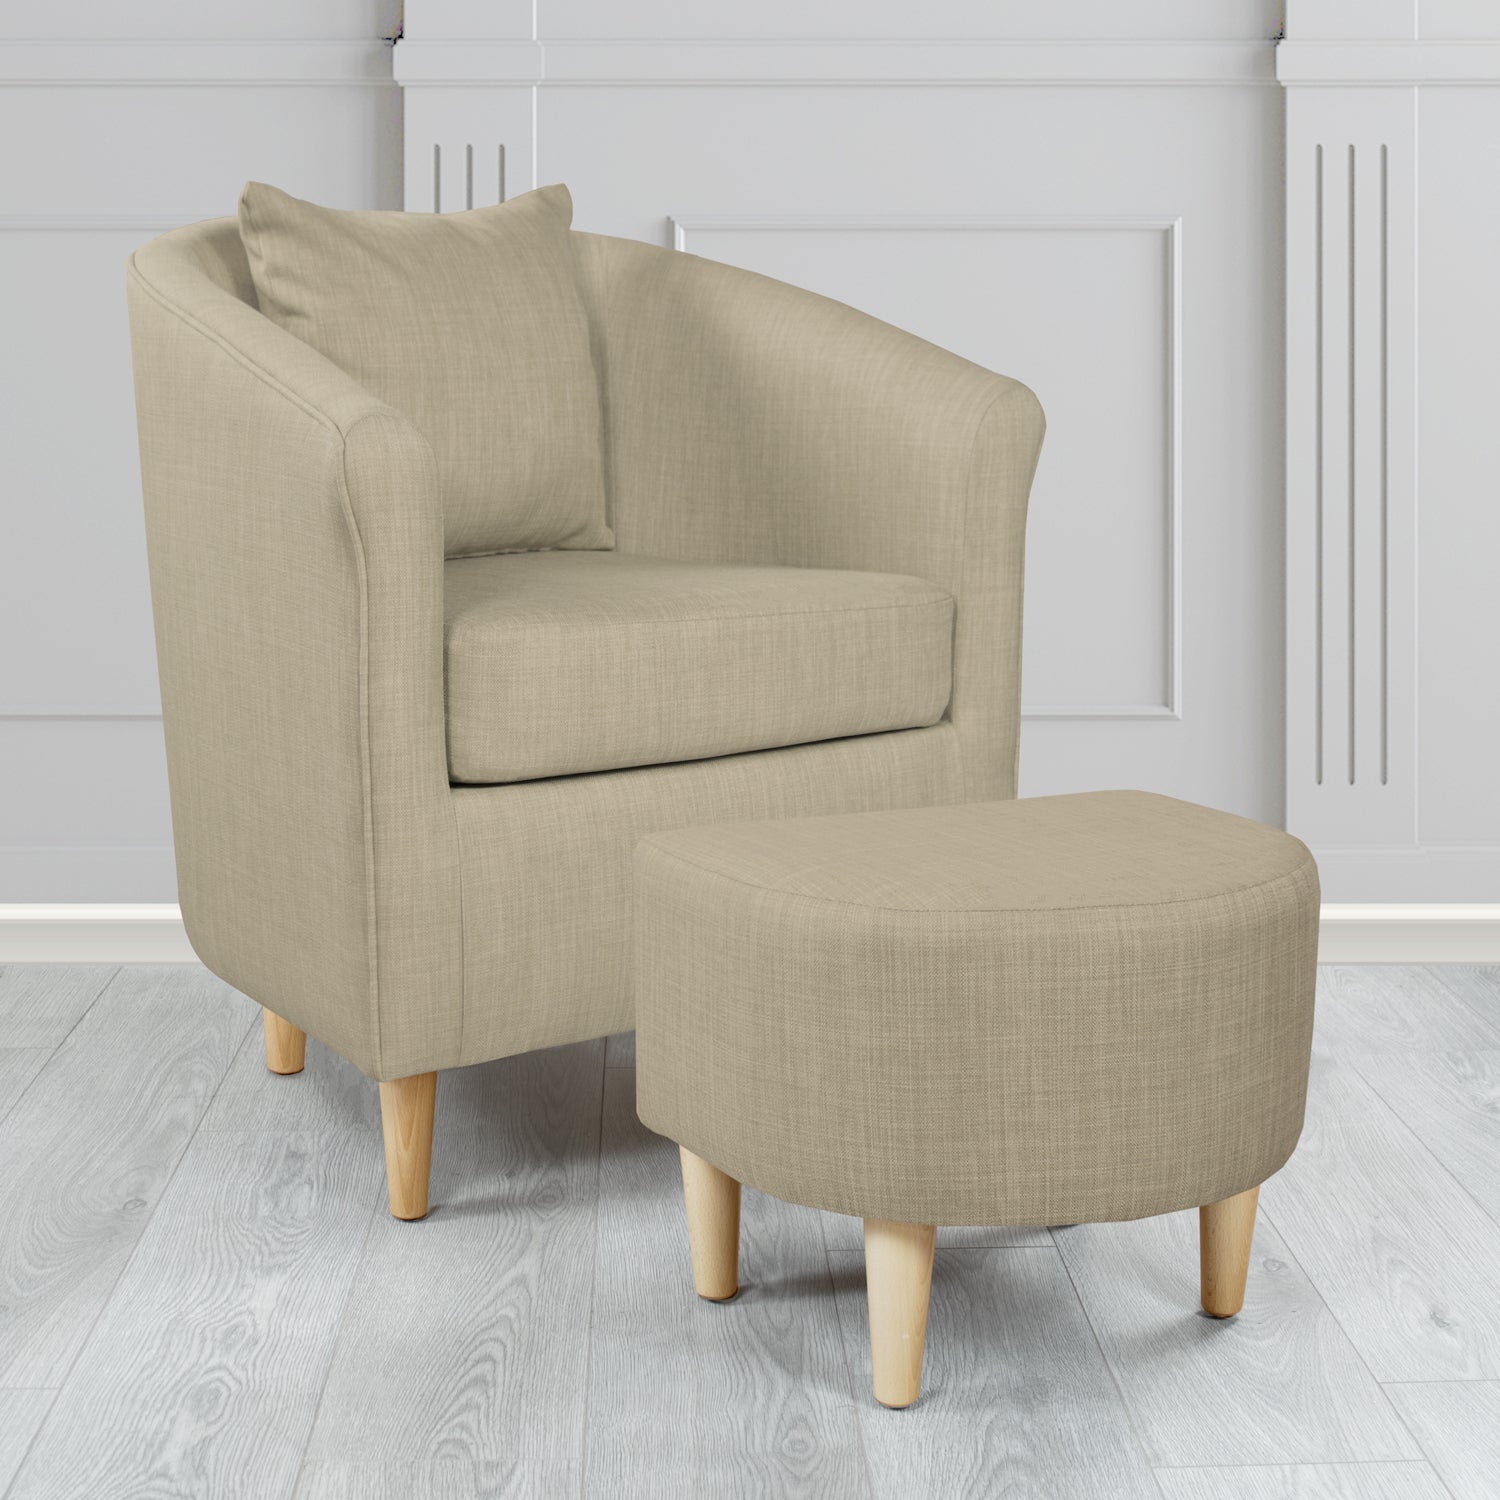 St Tropez Charles Fudge Plain Linen Fabric Tub Chair & Footstool Set with Scatter Cushion - The Tub Chair Shop